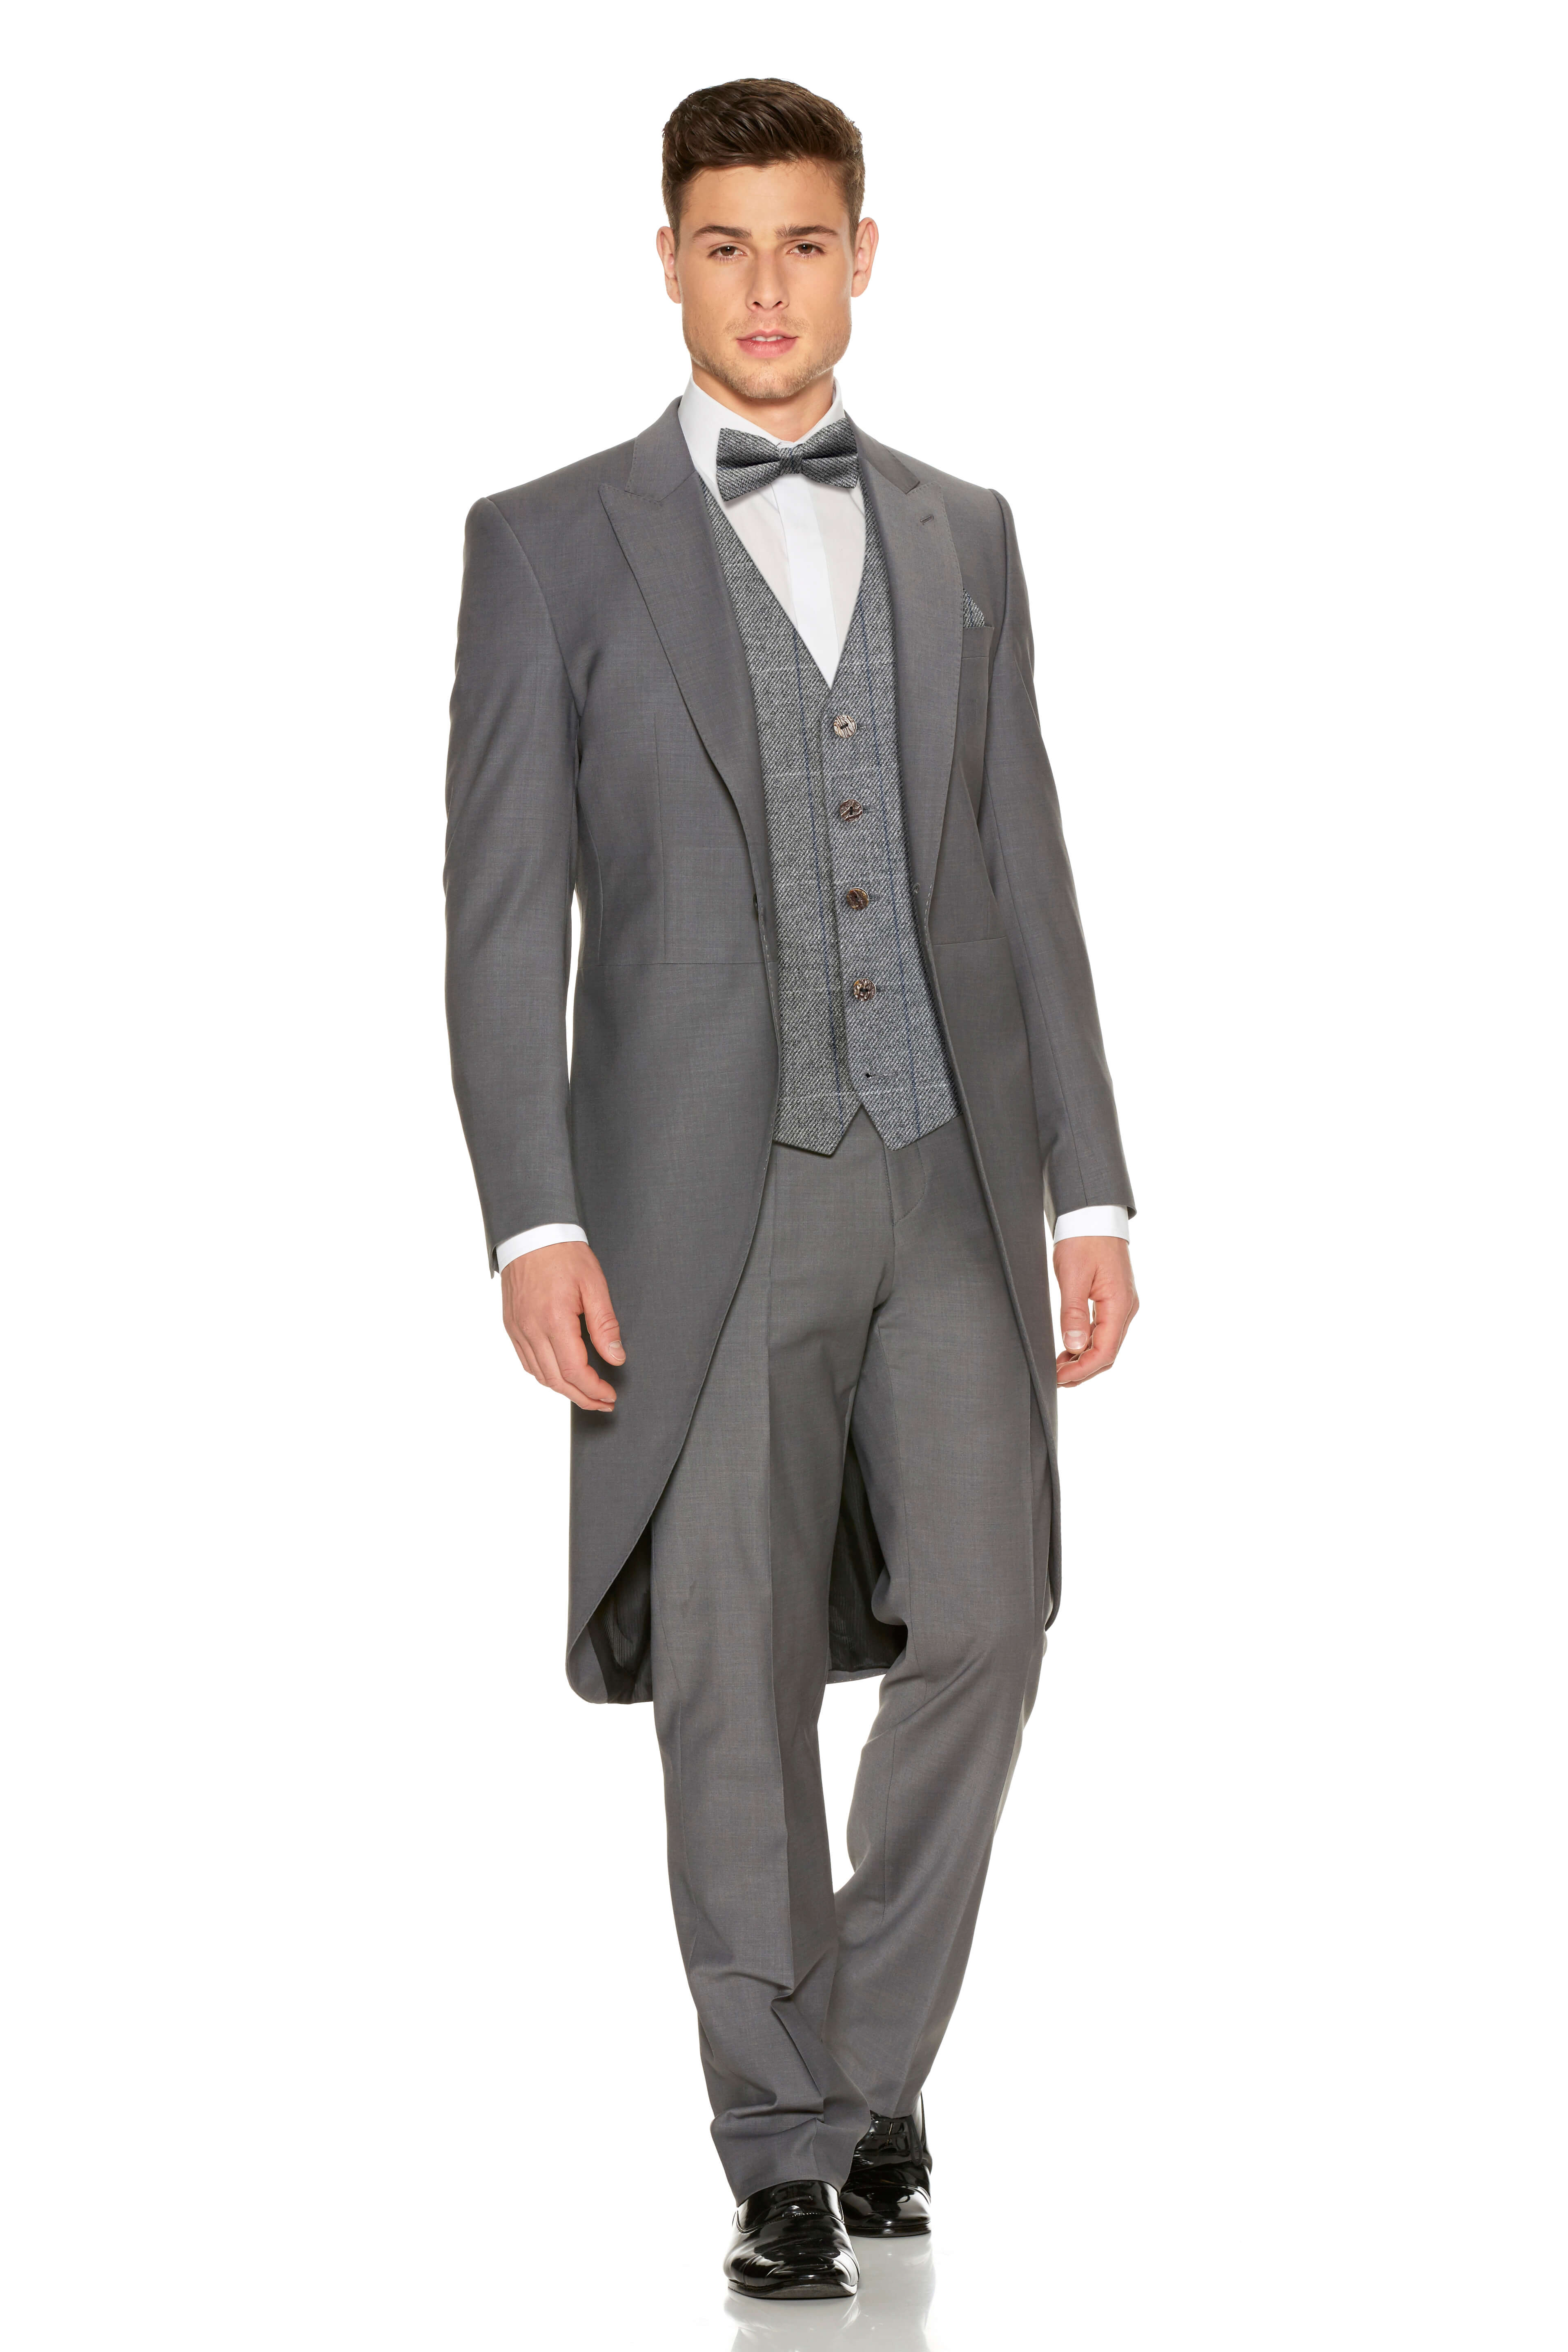 Man wearing complete hired suit